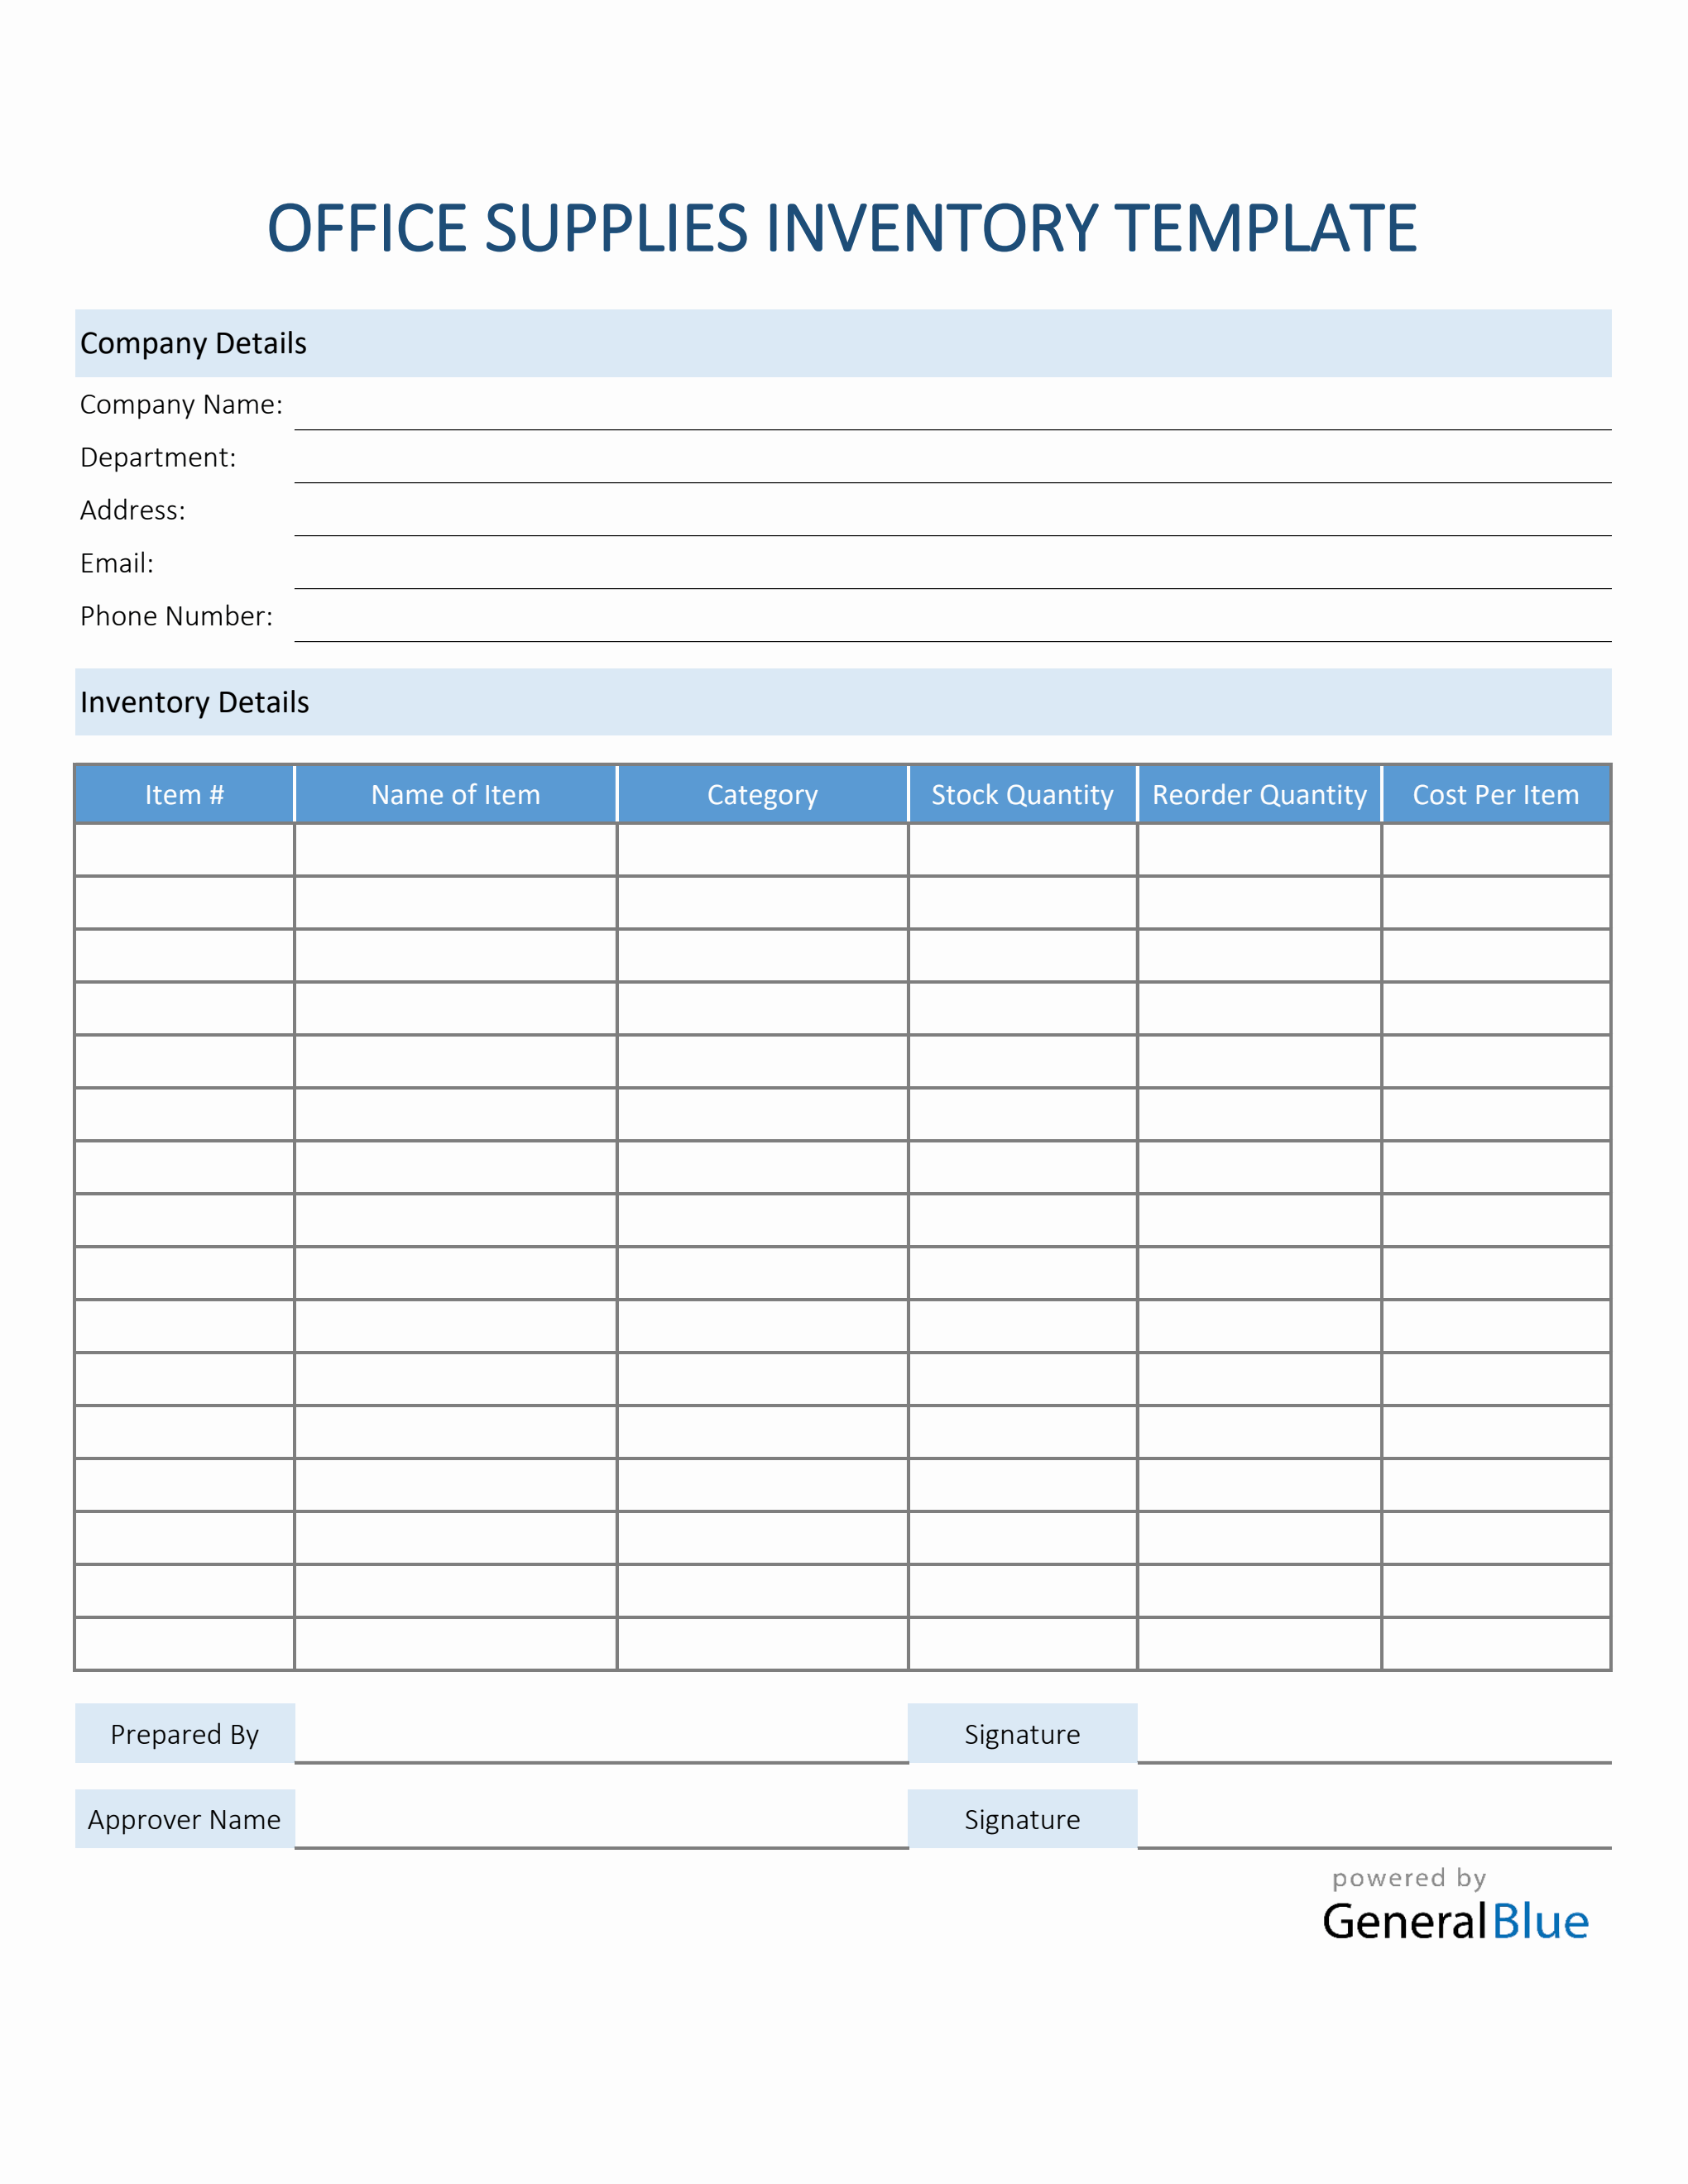 https://www.generalblue.com/office-supplies-inventory-template/p/td34ppm2v/f/office-supplies-inventory-template-in-excel-lg.png?v=5d13a77bf190f73e1b5b86bcdf218119